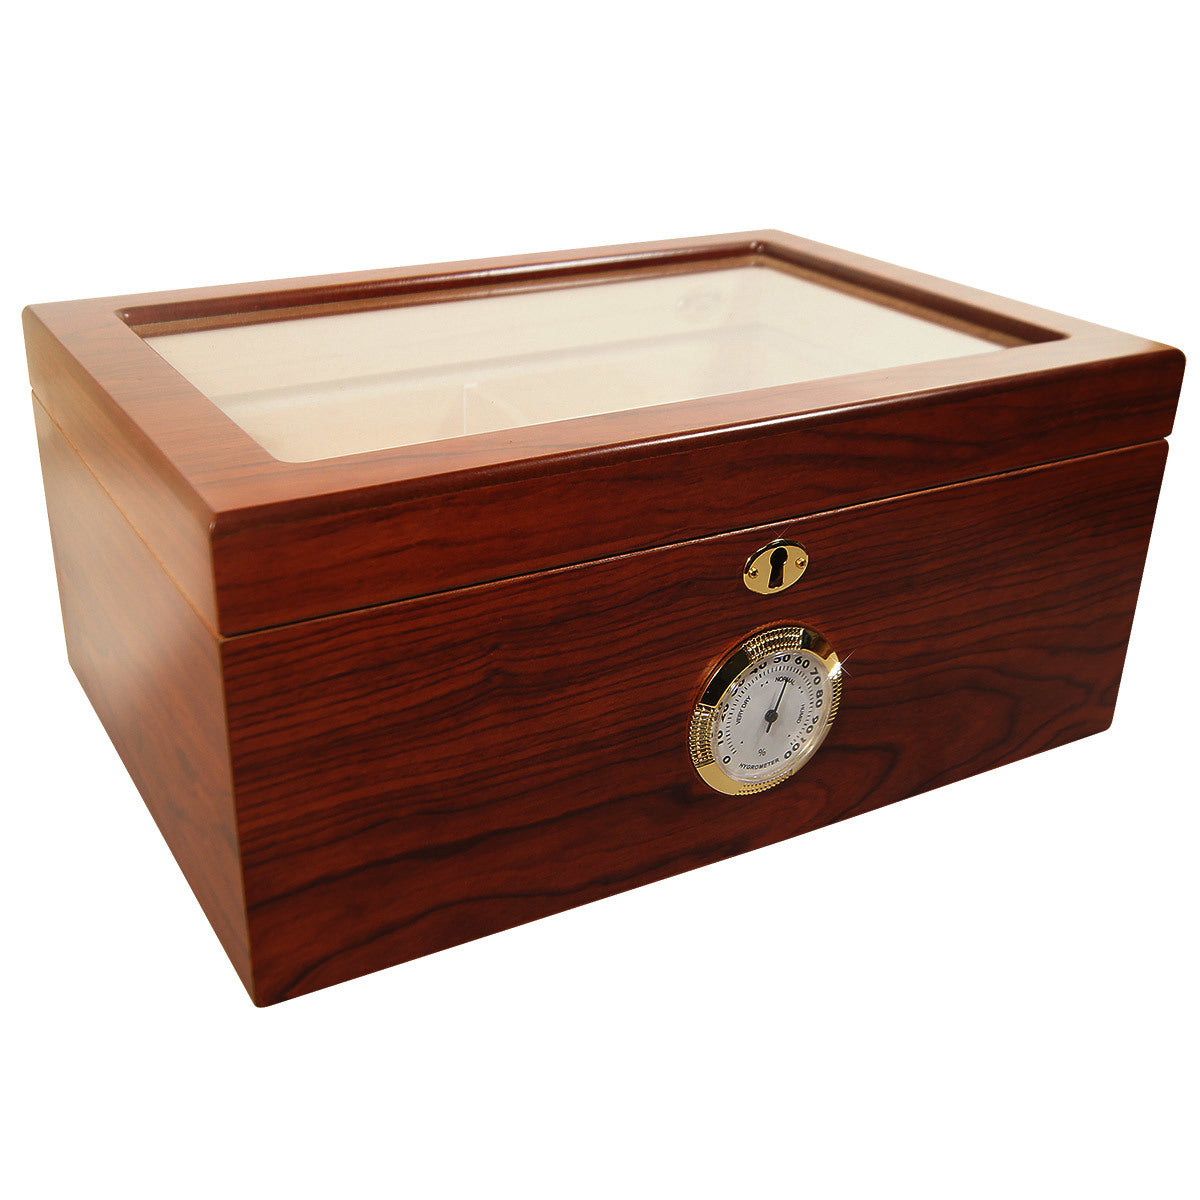 Cuban Crafters Presidente Glass Top Display Humidor for 100 Cigars